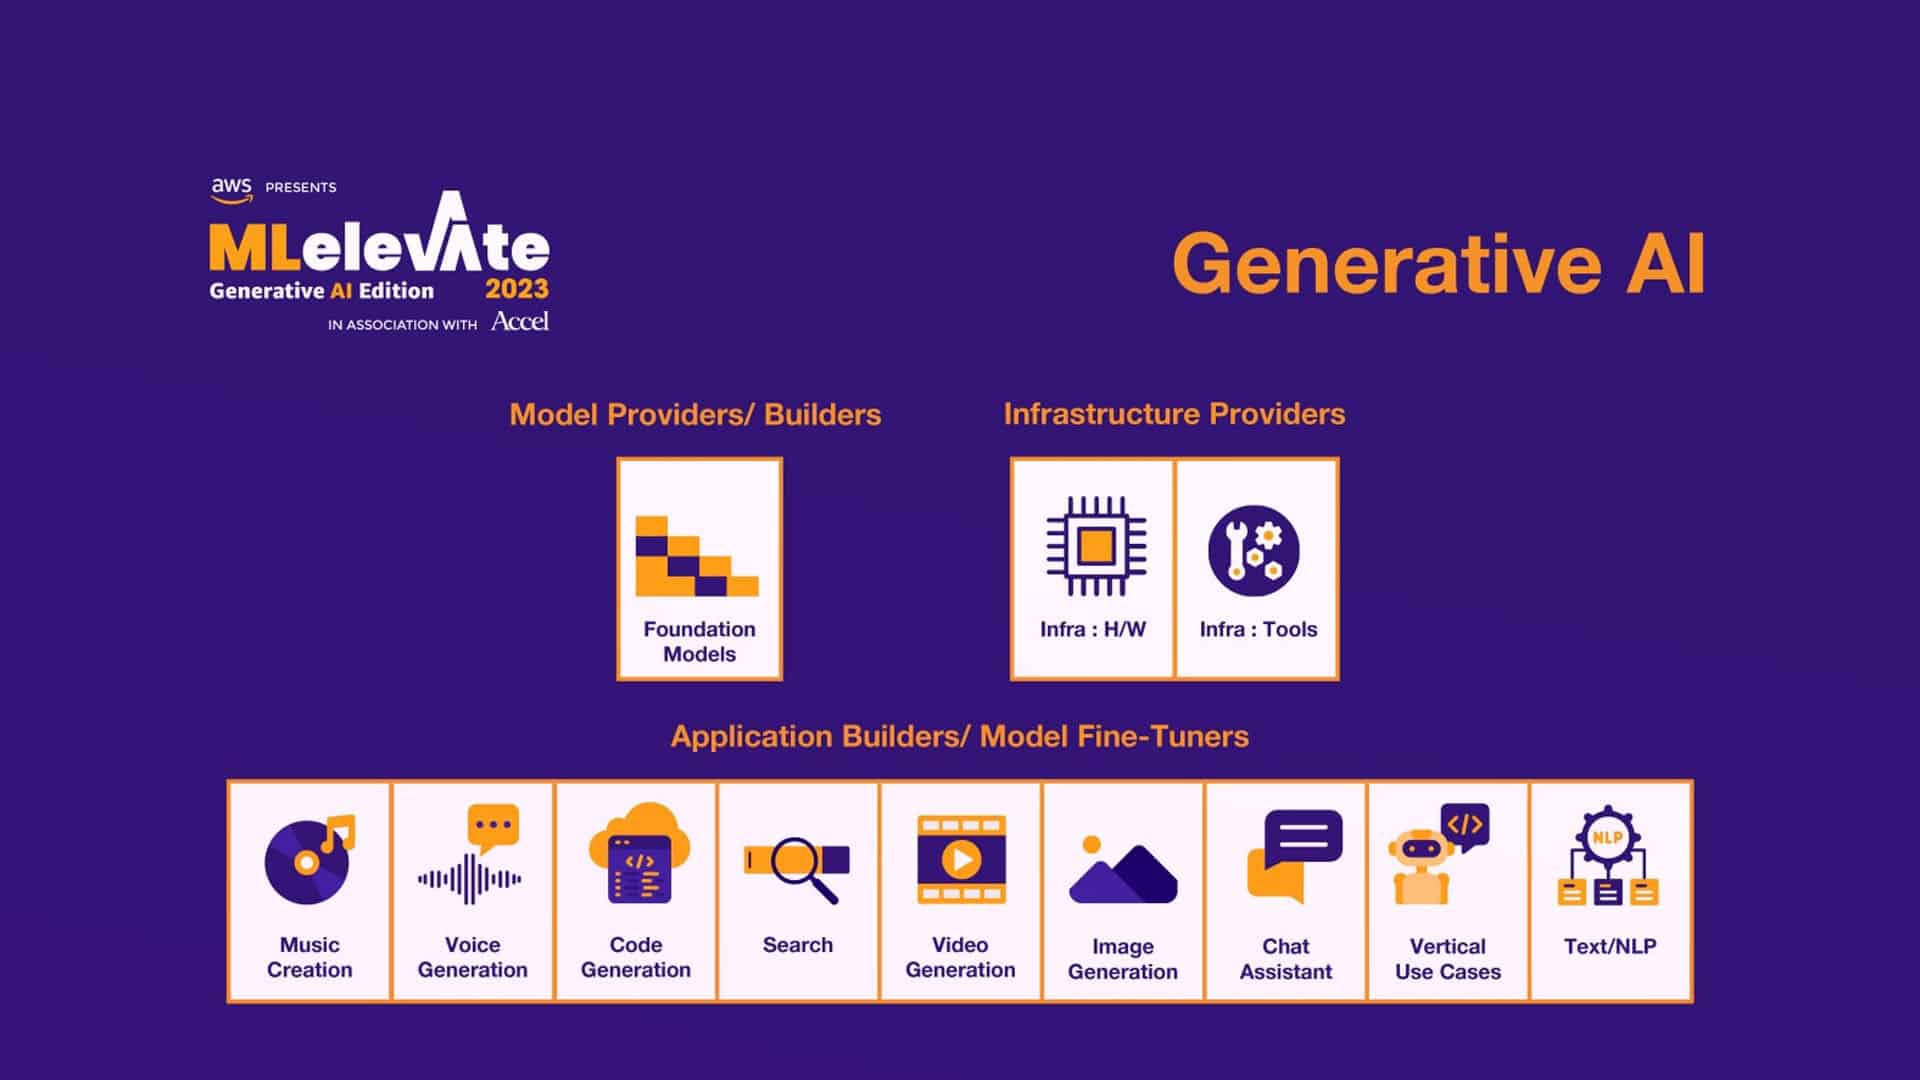 AWS, Accel announce ML Elevate 2023 to support generative AI startups